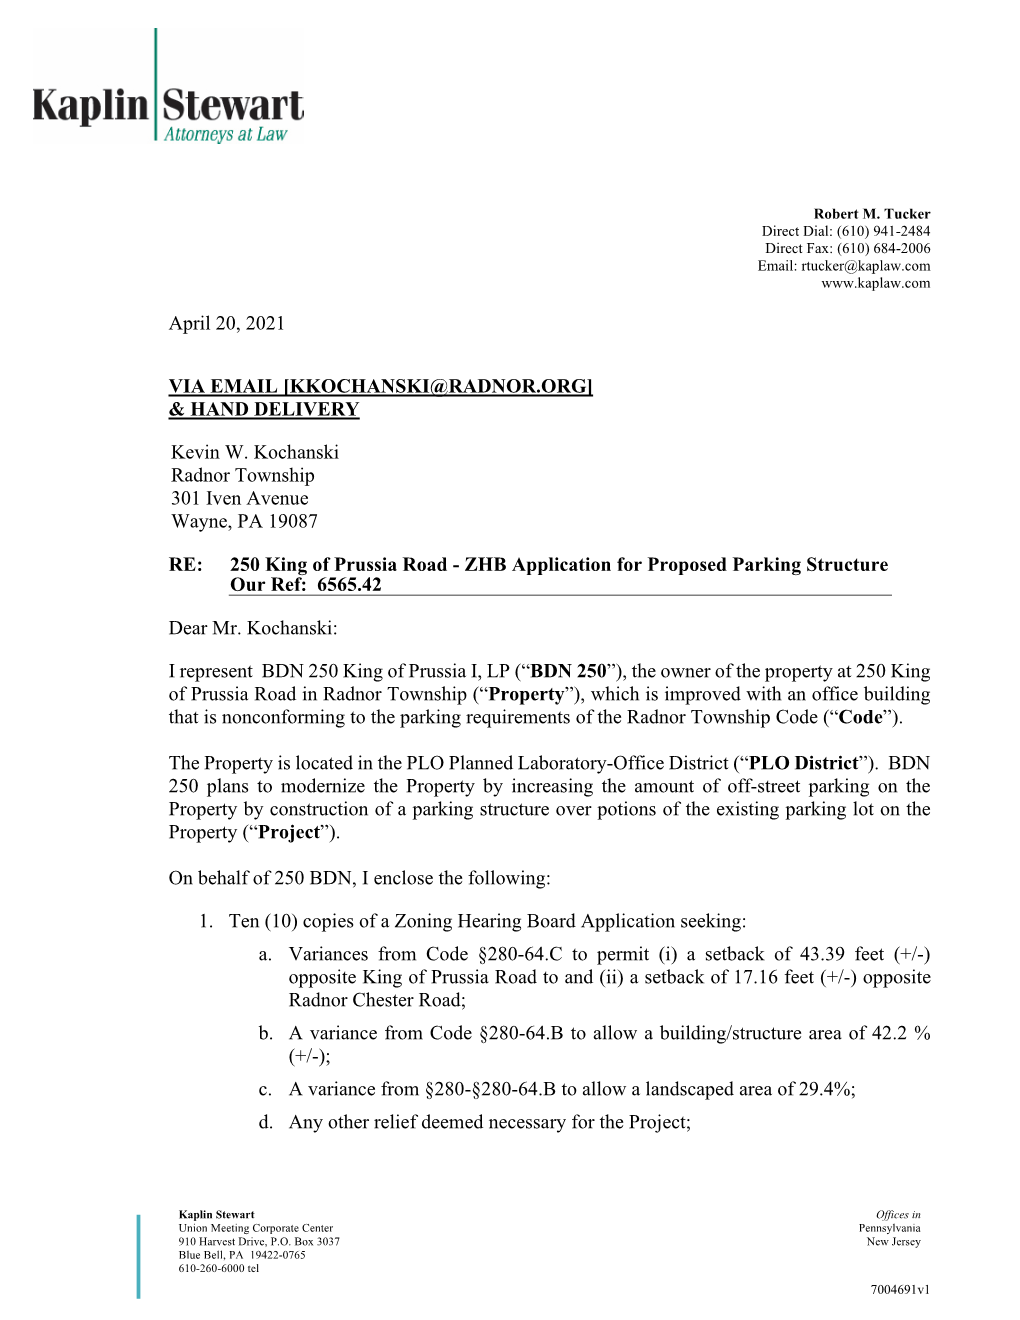 Planning Commission Meeting May 3, 2021